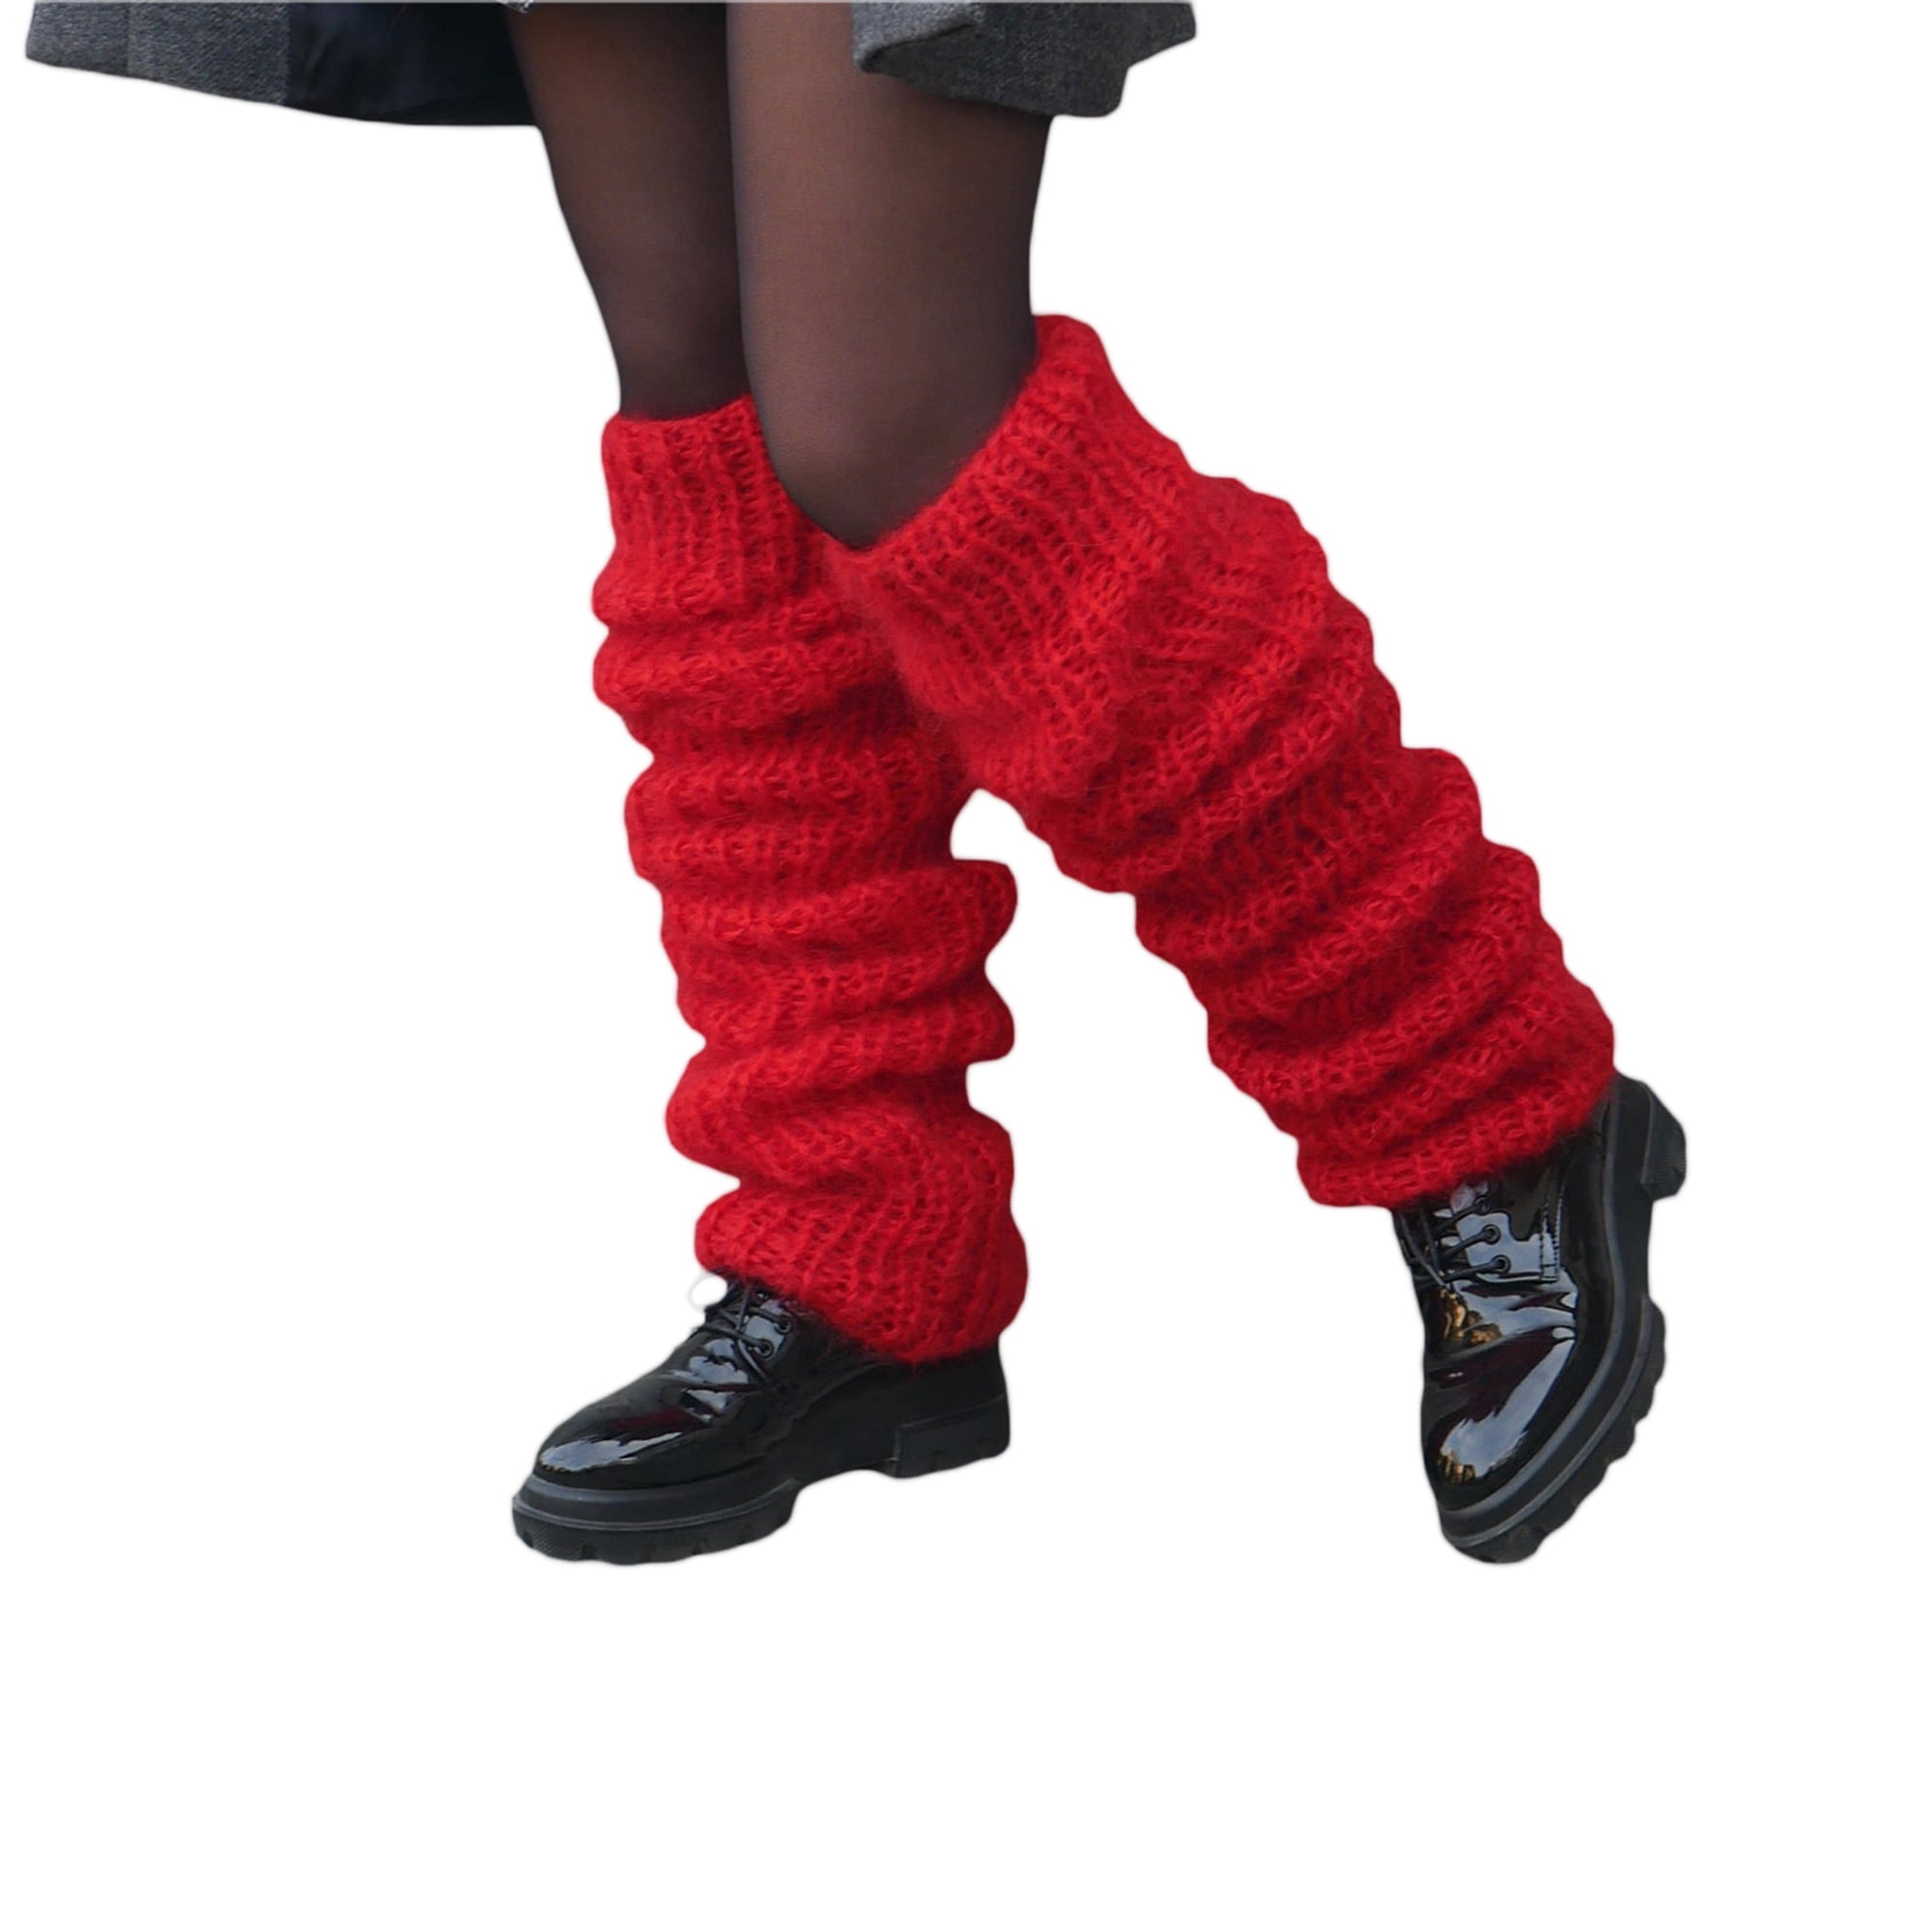 Pack OF Deluxe Luxurious Ladies 80's Plain Ribbed Leg Warmers